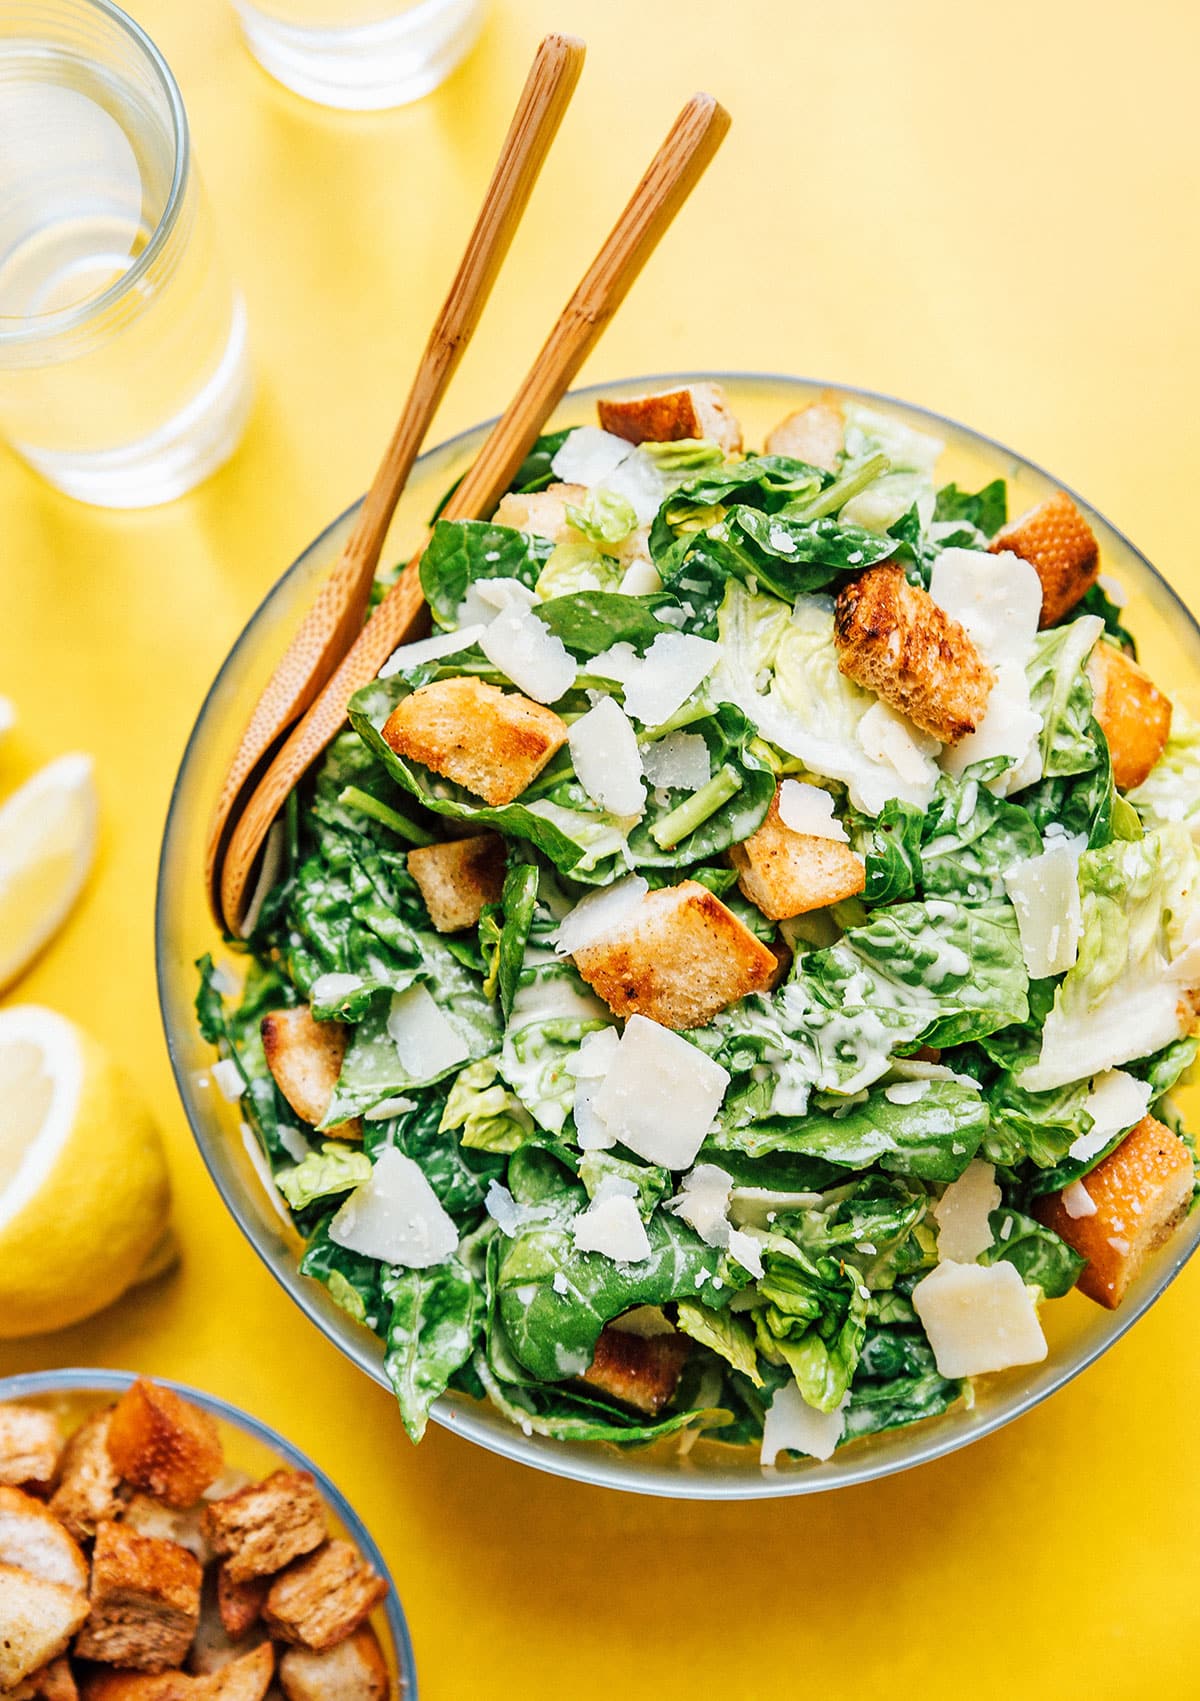 Caesar salad in a bowl with croutons, romaine lettuce, and parmesan